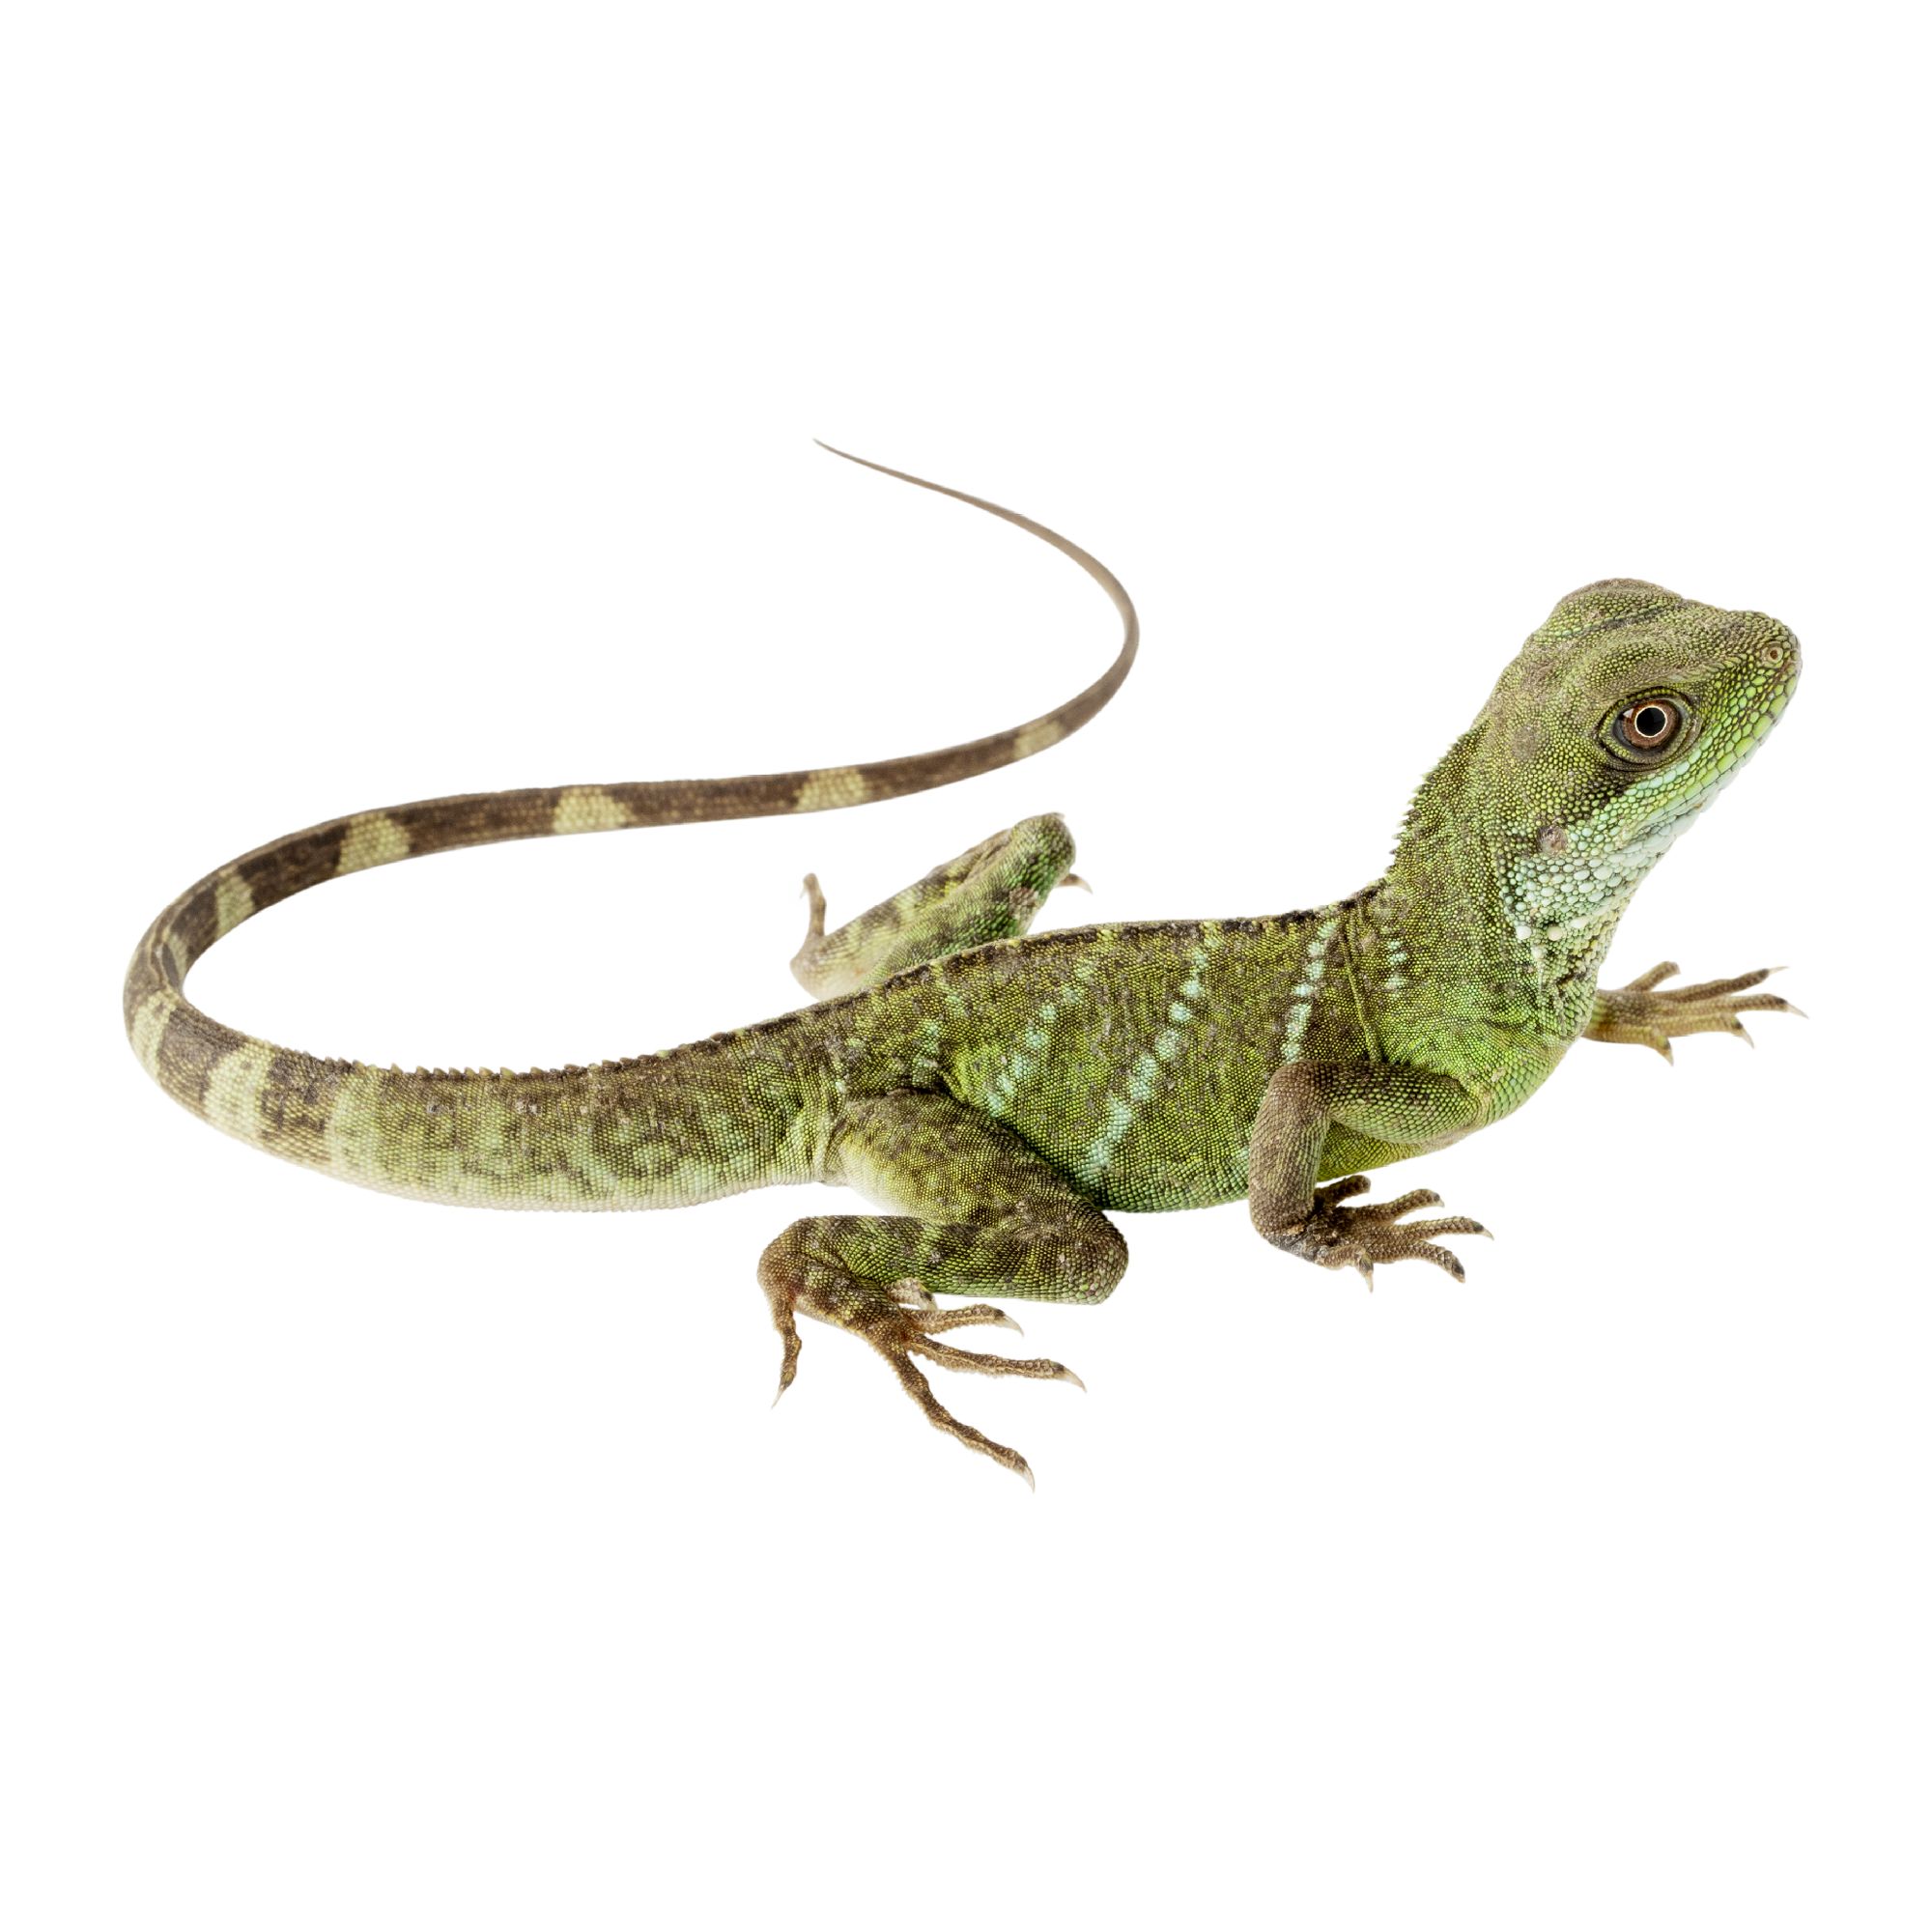 Chinese Water Dragon For Sale Live Pet Reptiles Petsmart,Outdoor Potted Plants Full Sun